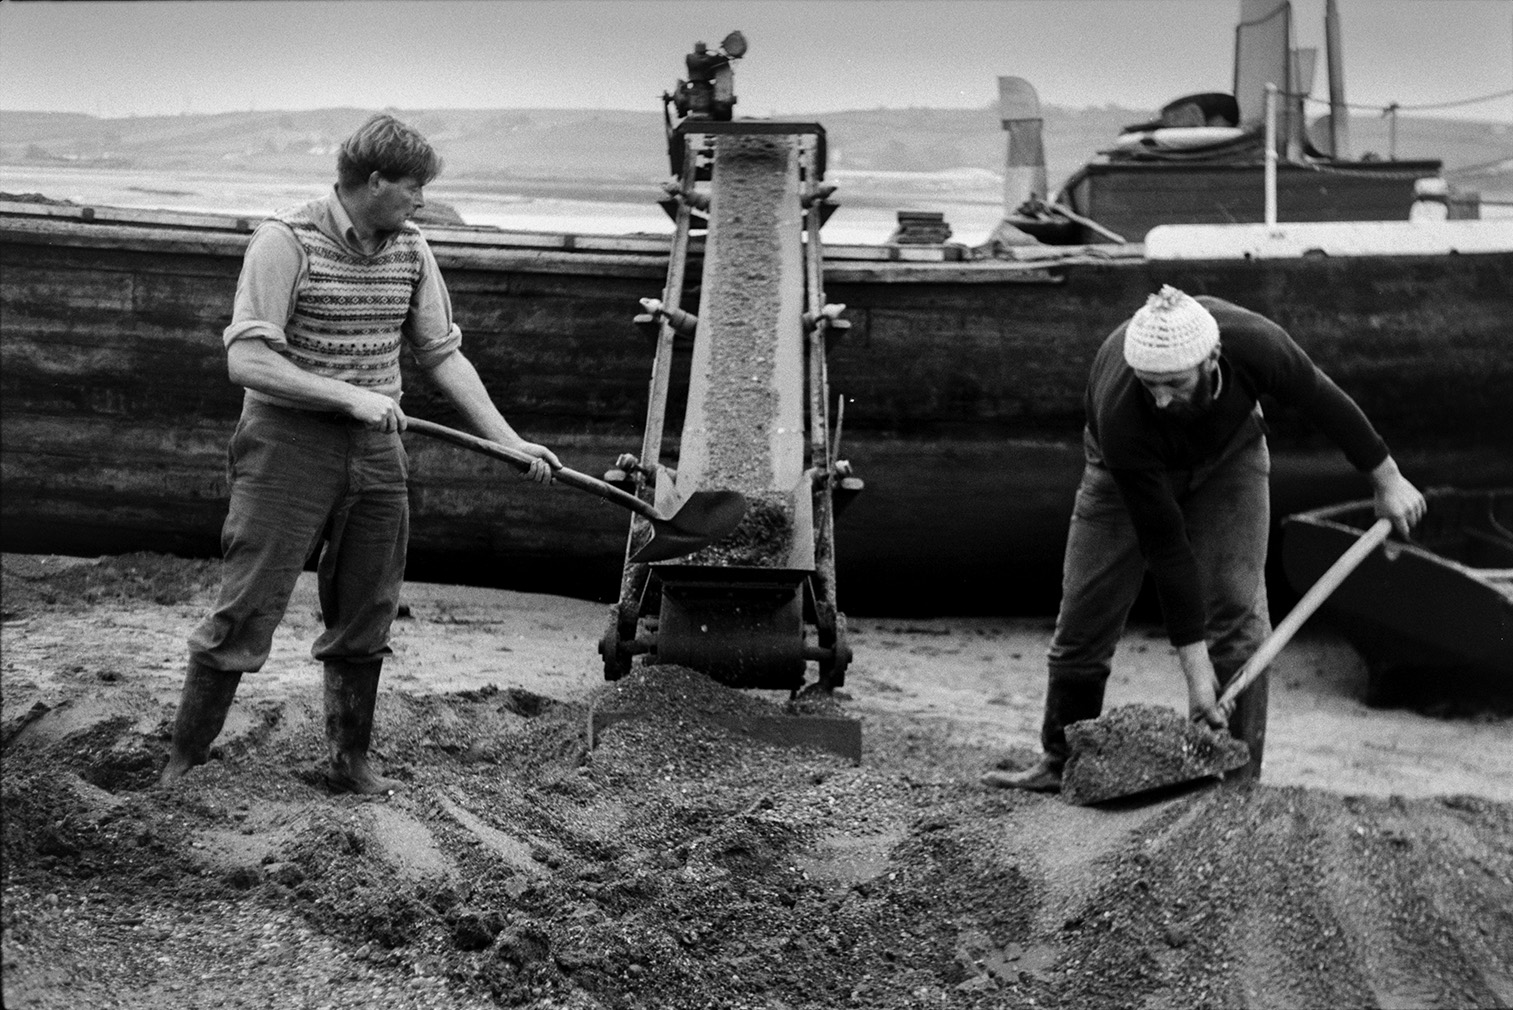 Men shovelling sand from the beach onto a conveyor belt or elevator attached to a sand barge at Crow Point, Braunton. The barge can be seen behind them.